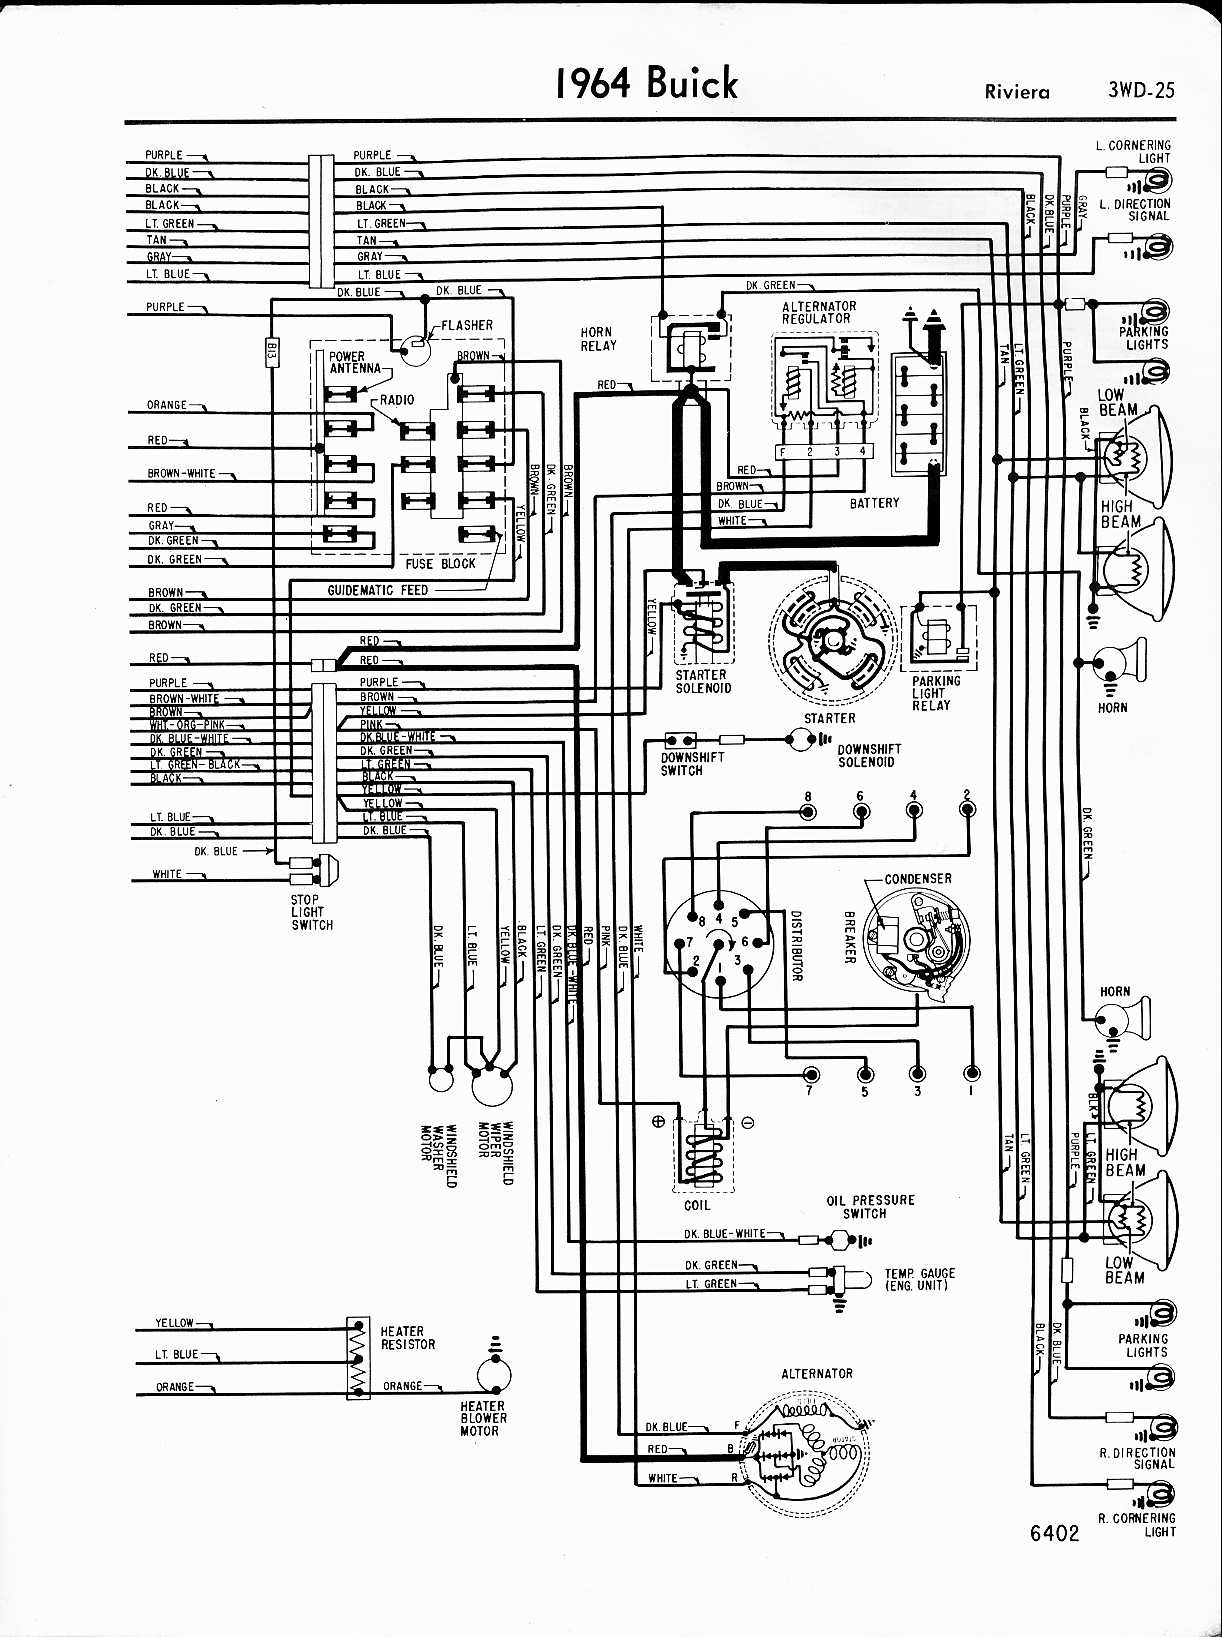 1973 Buick Lesabre Engine Diagram | Wiring Library land rover wiring diagrams 1966 ford mustang diagram 